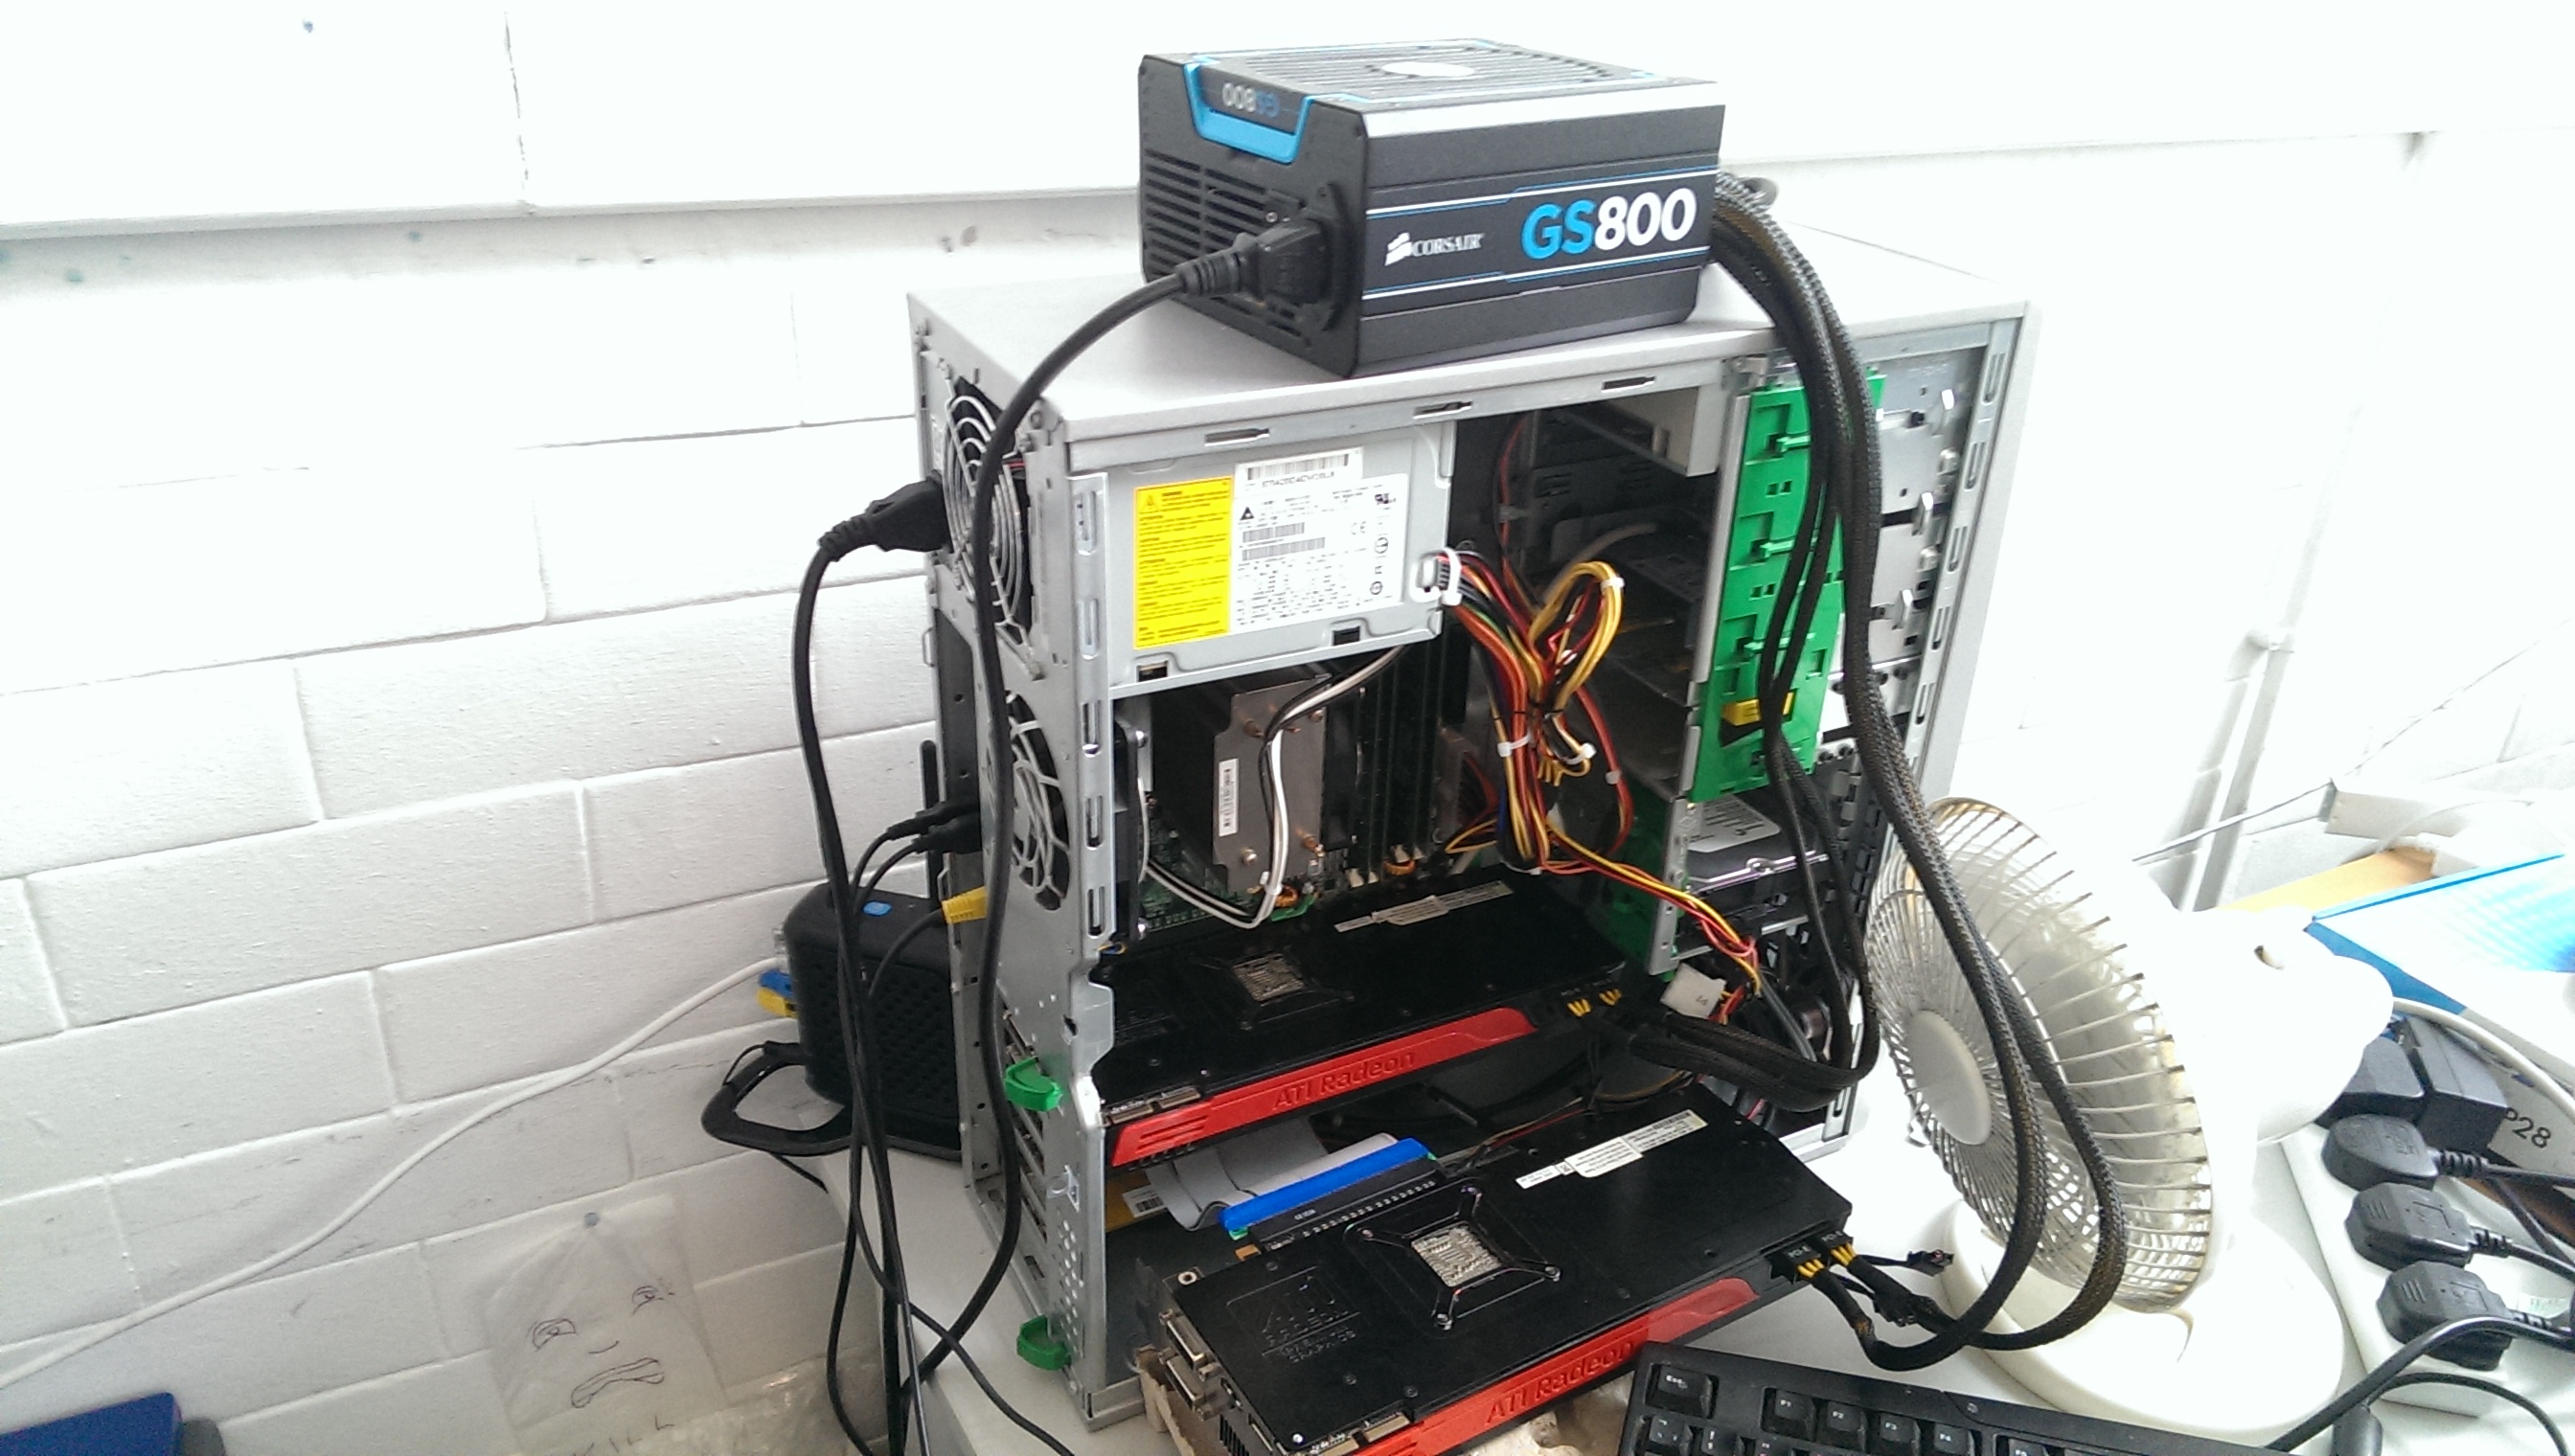 Bitcoin Mining Rigs Australia - CRYPTOCURRENCY: HOW TO BUILD A BUDGET MINING RIG / This is where a bitcoin mining rig differs from a regular pc in that you can't have all the graphics cards directly attached to the motherboard, so these risers allow you to connect them indirectly.